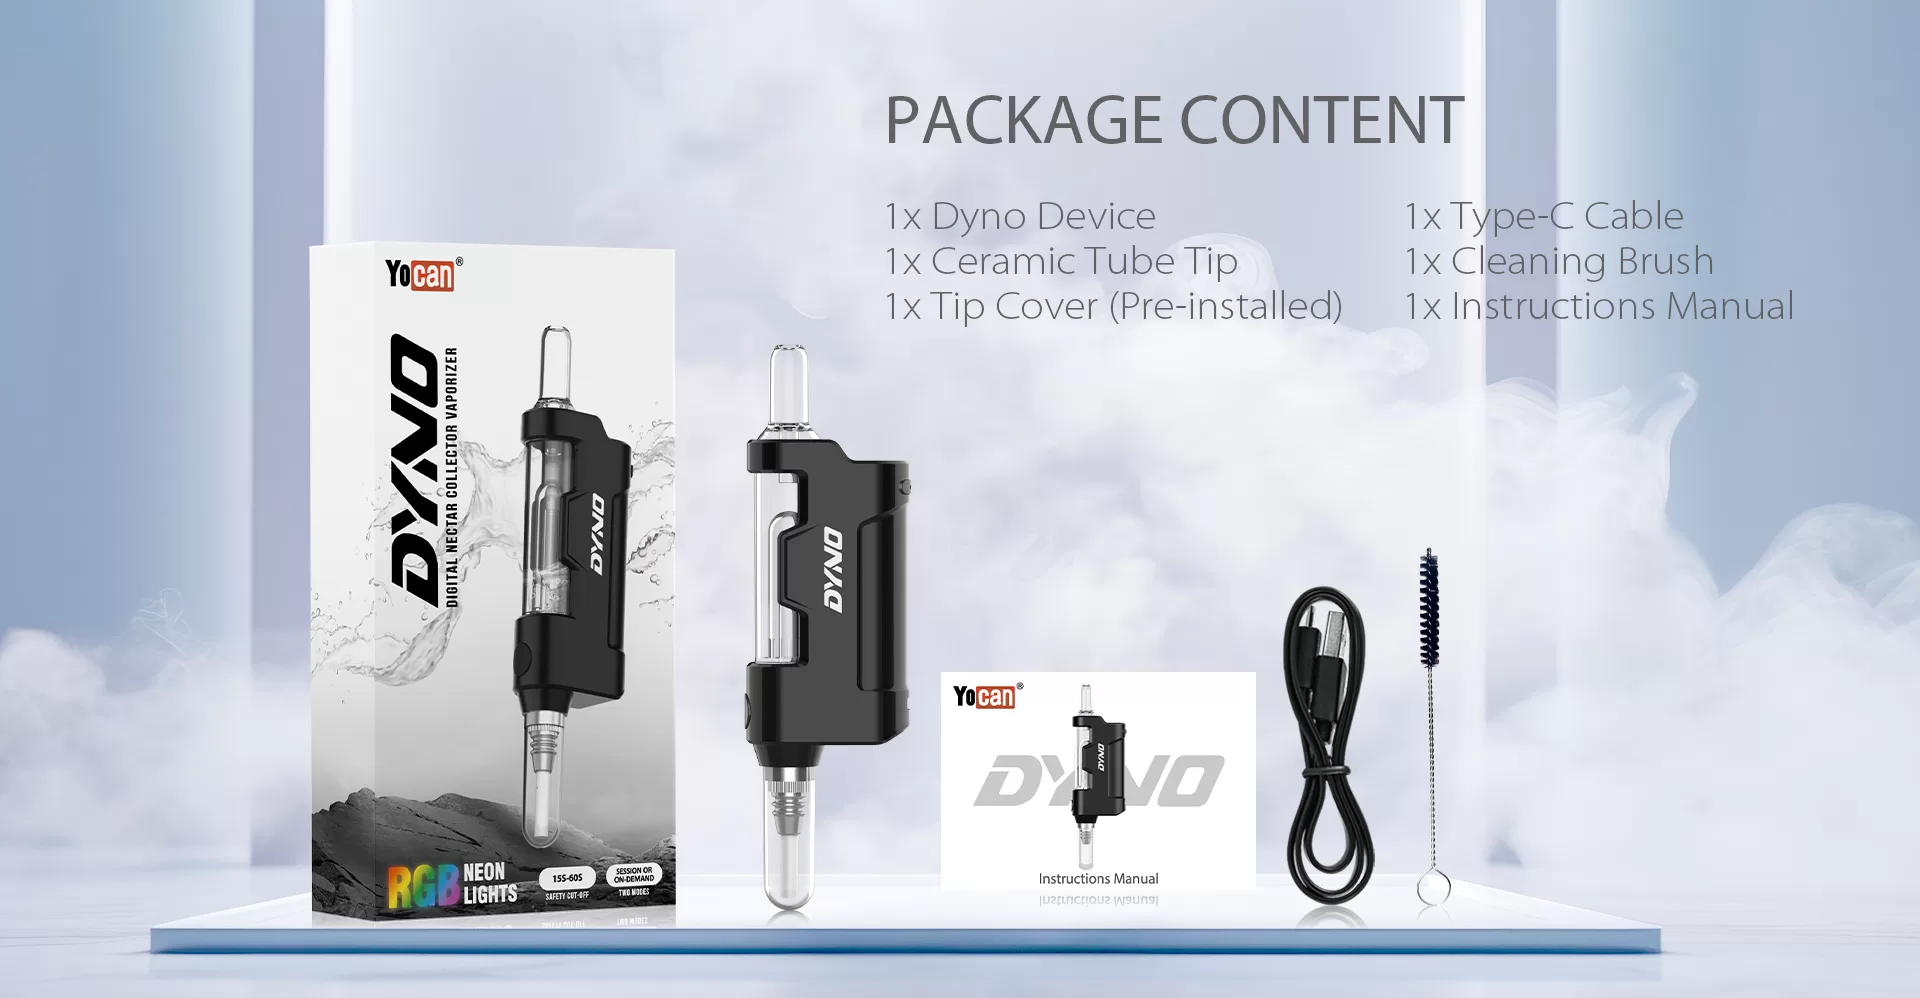 Product packaging details of Yocan Dyno Digital Nectar Collector with Glass Bubbler (Contains: 1x Dyno Device 1x Ceramic Tube Tip 1x Tip Cover (Pre-installed) 1xType-C Cable 1x Cleaning Brush 1x Instructions Manual)